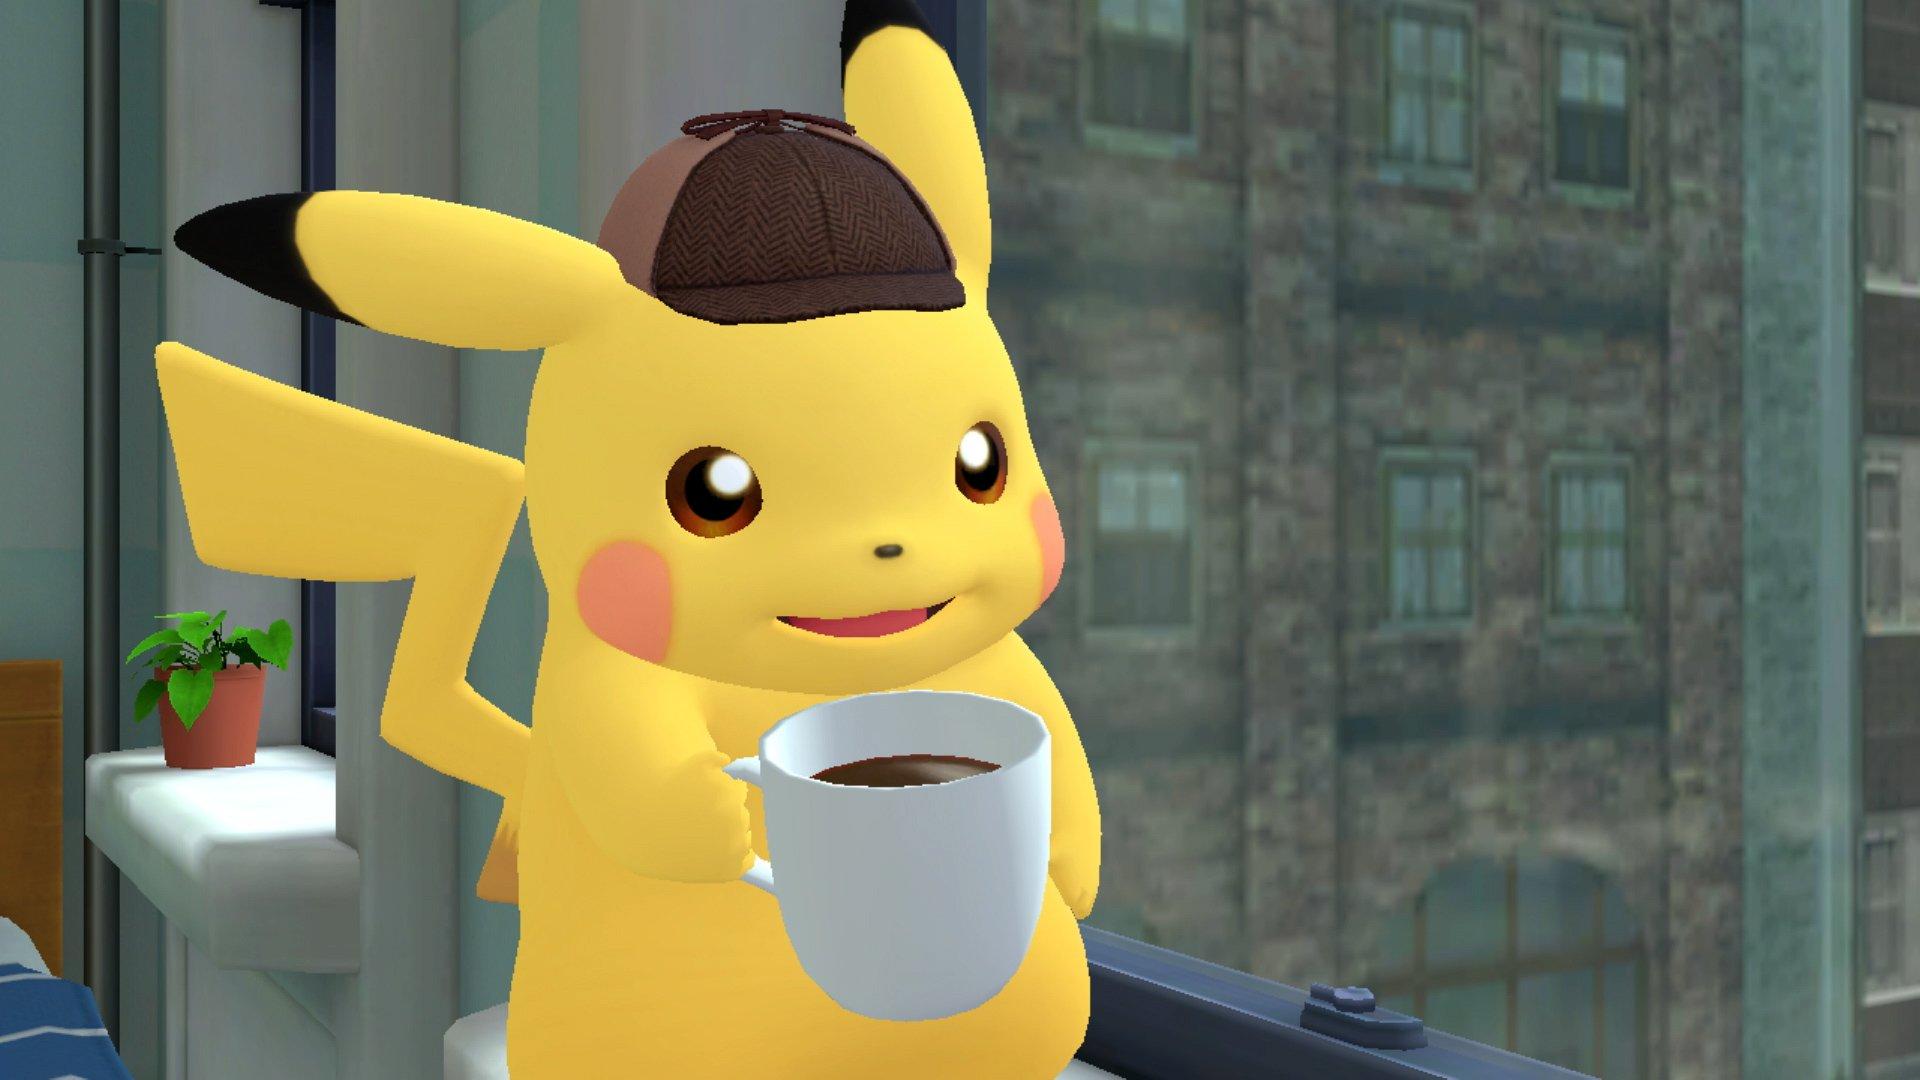 Where To Buy Detective Pikachu Returns On Switch